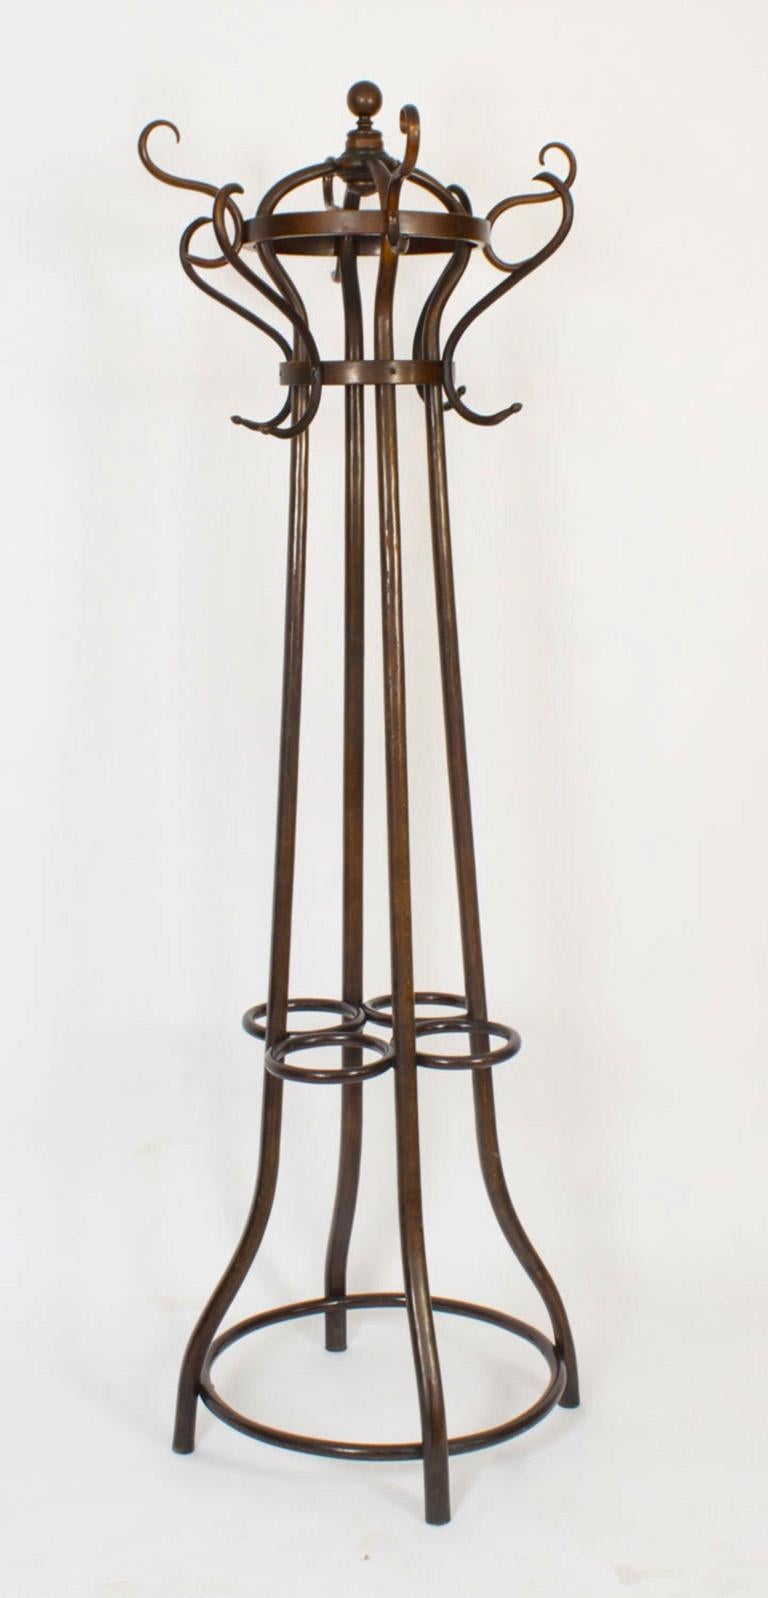 An excellent and rare antique pair of Thonet Vienna Art Nouvean free standing ormolu mounted bentwood coat / hat / stick stands, late 19th century in date.
The pair of  stained beech bentwood hall stands feaure eight S-scroll form hat and coat pegs